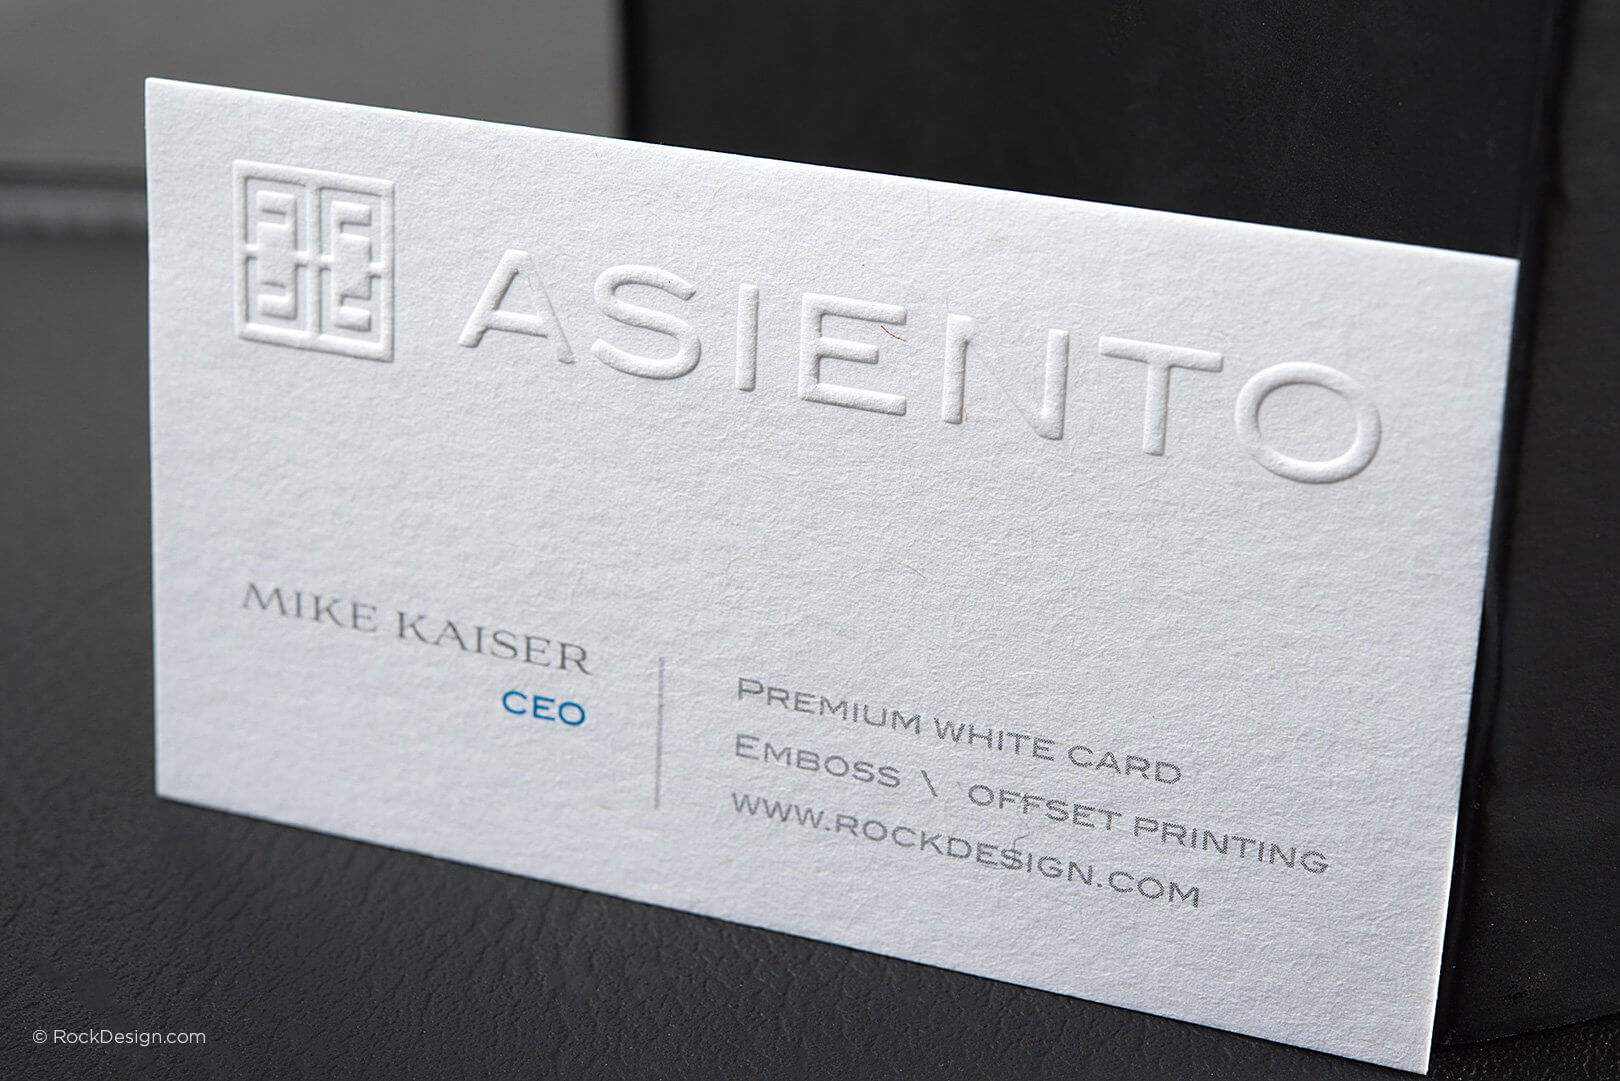 Embossed Design Free With Online Print Purchase | Rockdesign Within Free Template Business Cards To Print